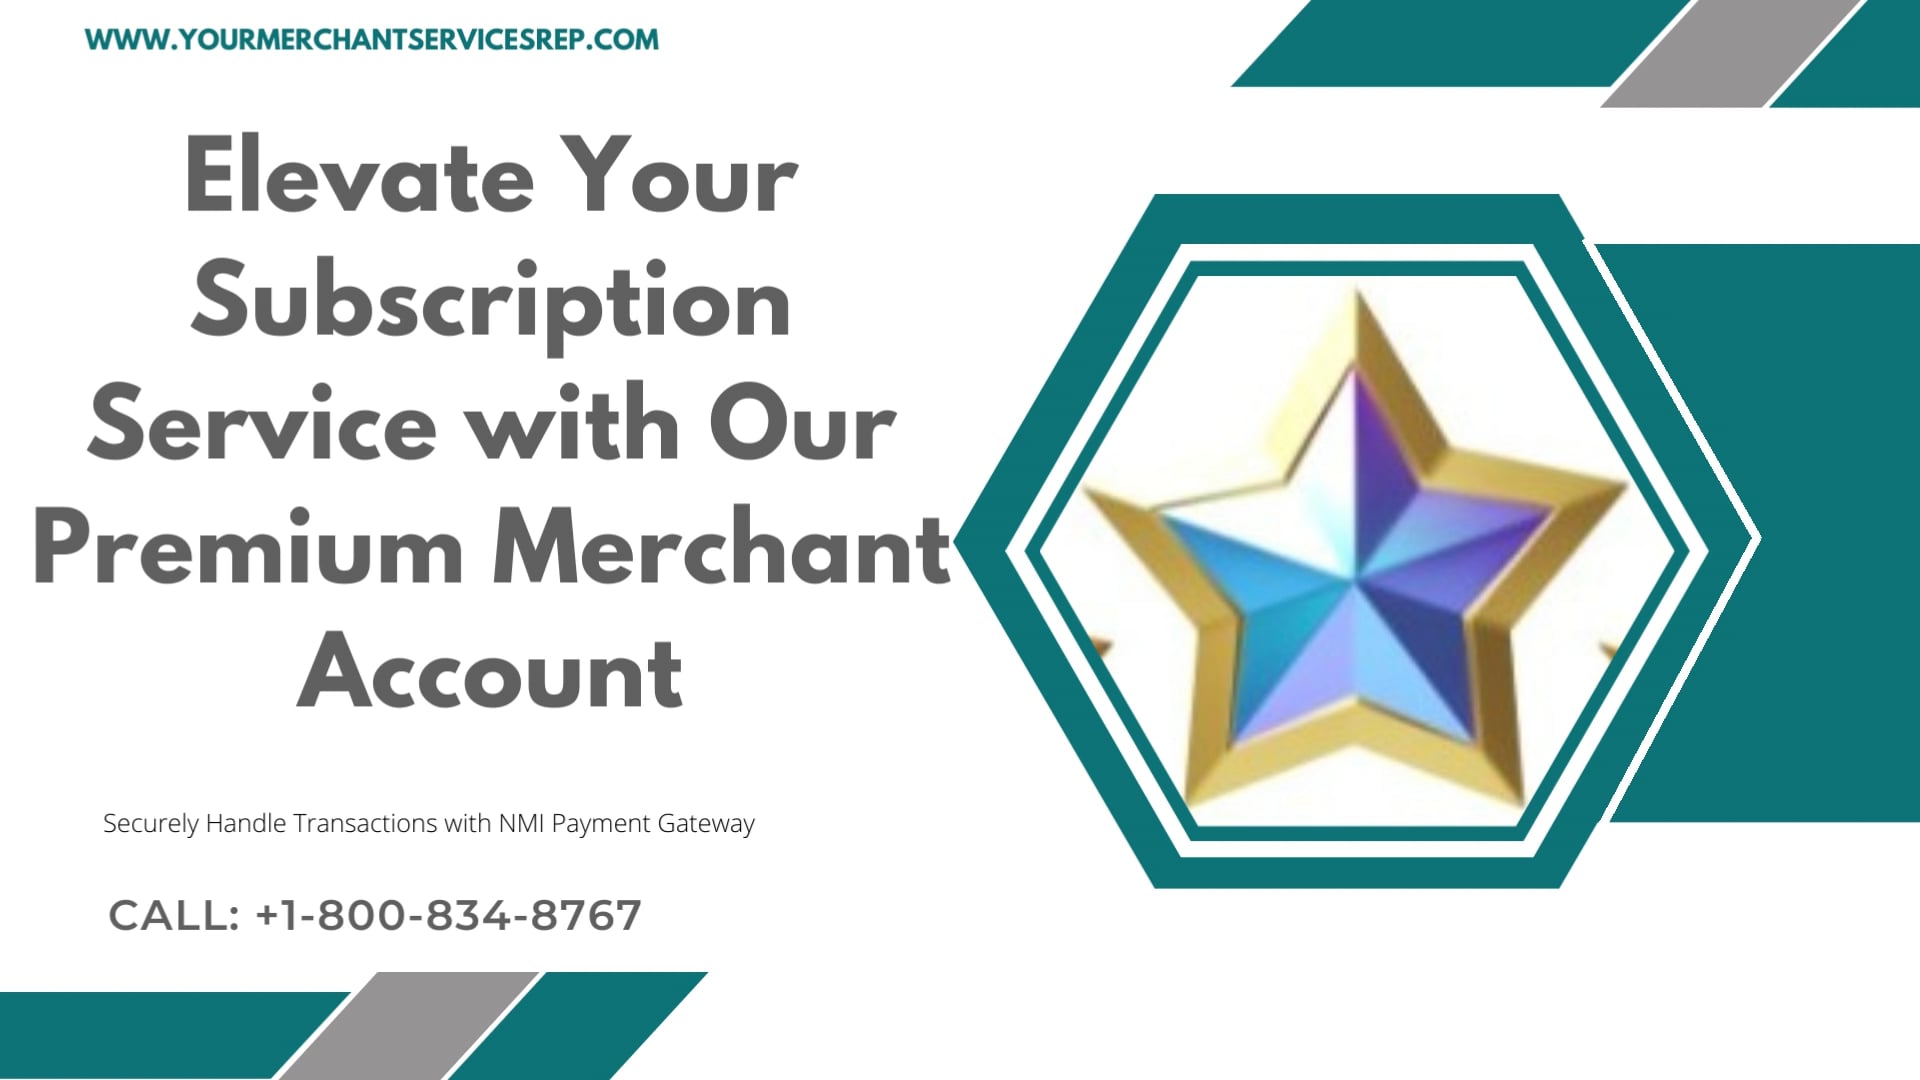 Elevate Your Subscription Service with Our Premium Merchant Account on Vimeo